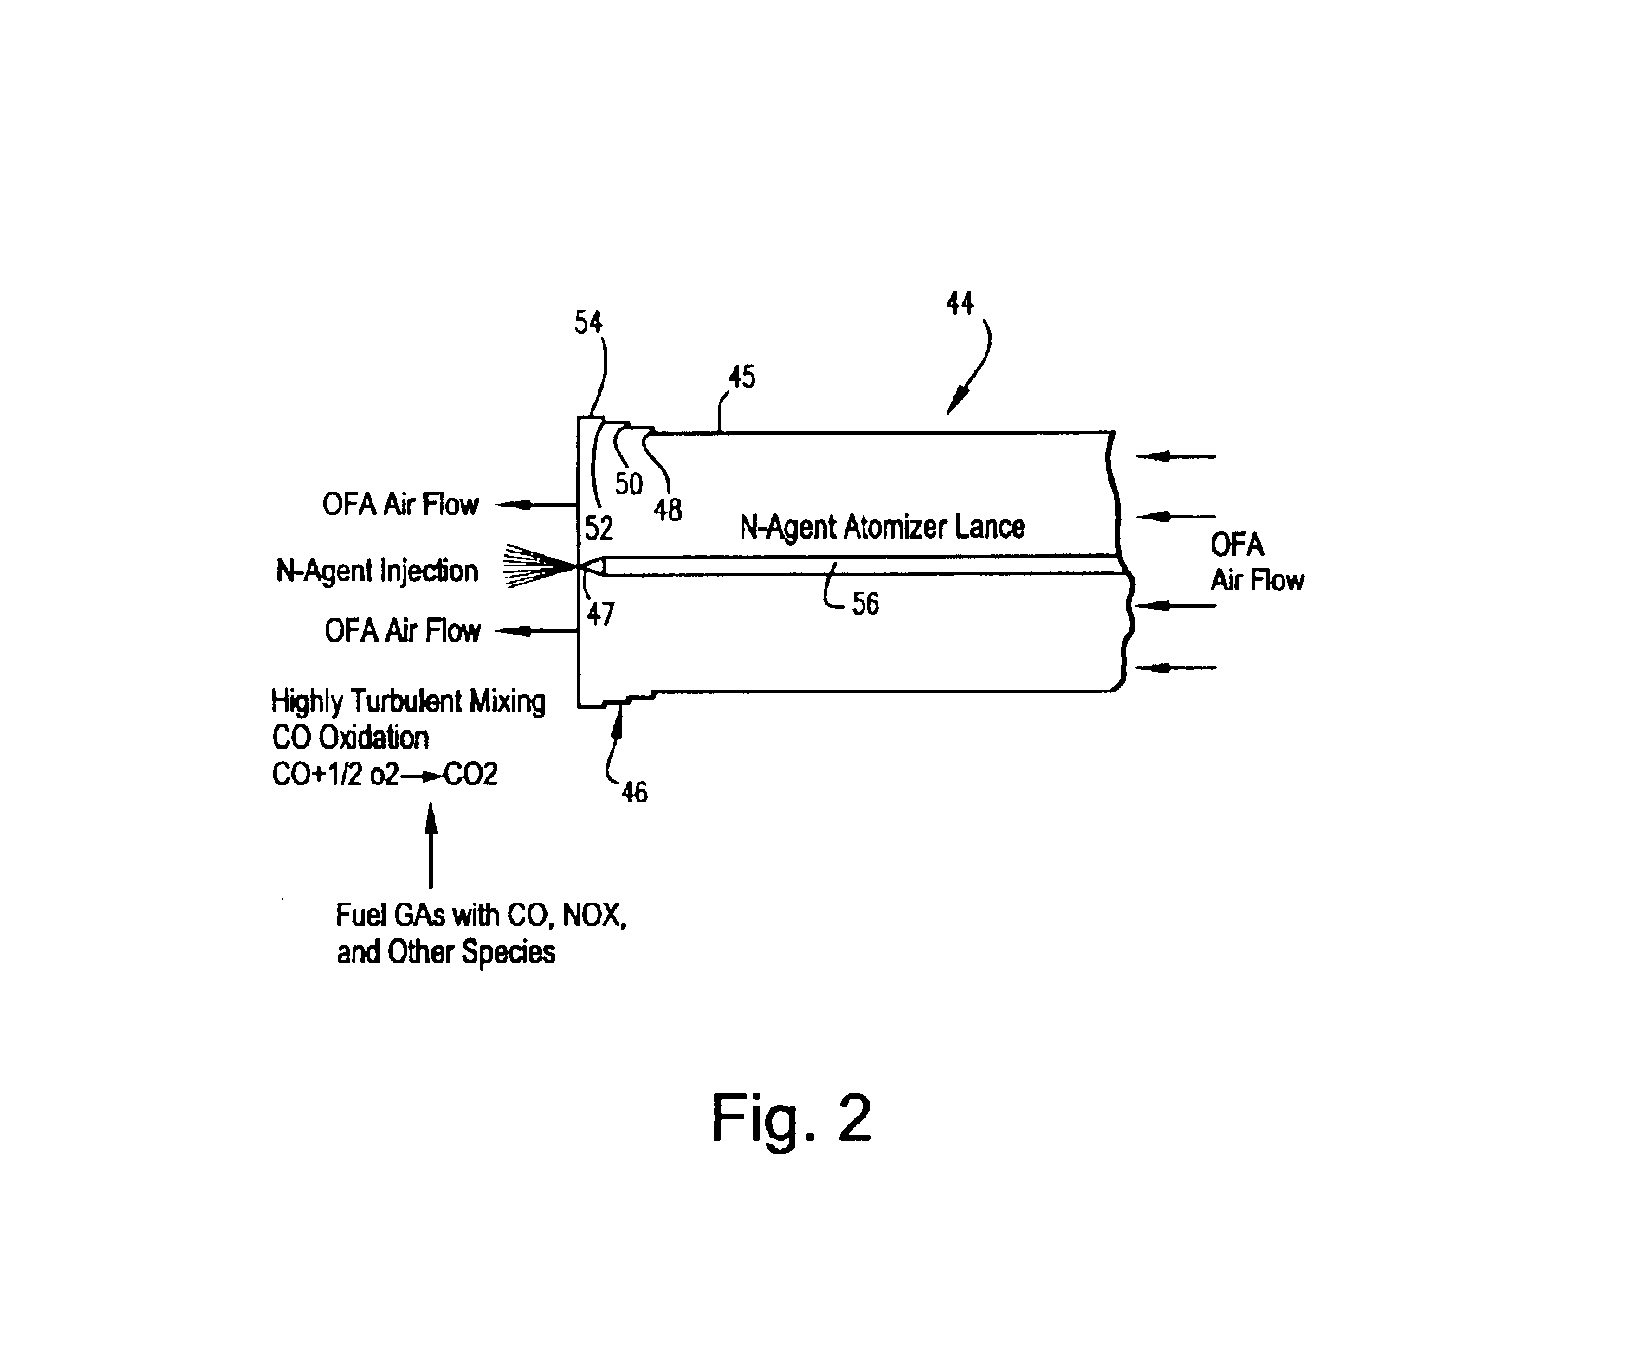 Step-diffuser for overfire air and overfire air/N-agent injector systems